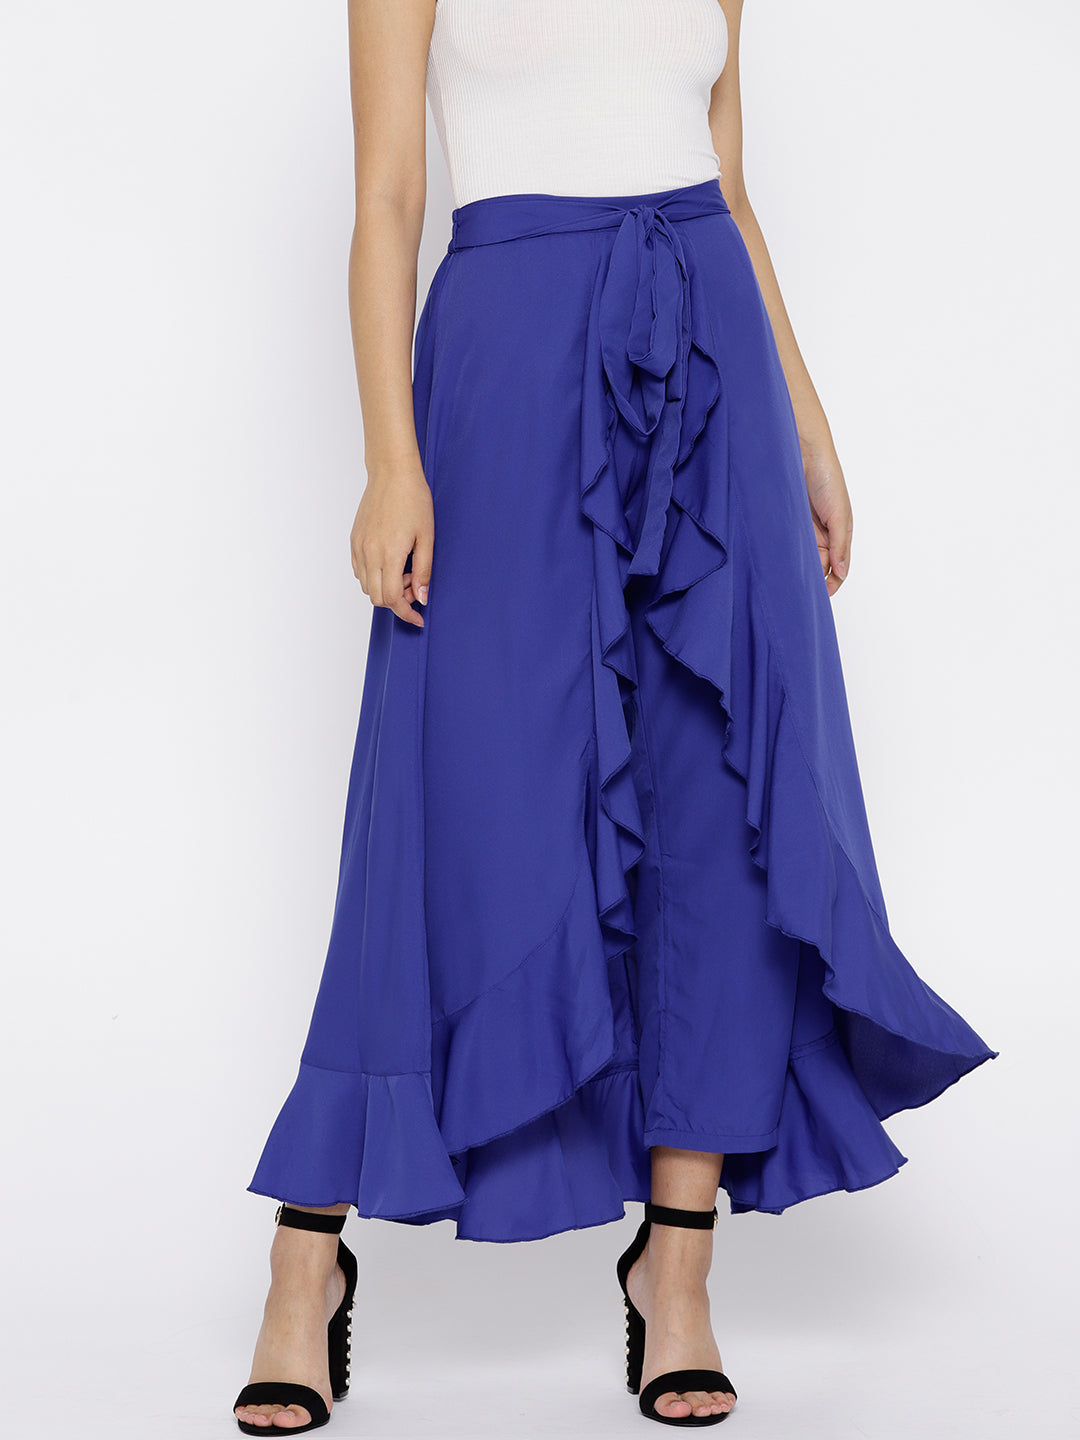 Blue Solid Ruffled Flared Maxi Skirt with Attached Trousers - Berrylush